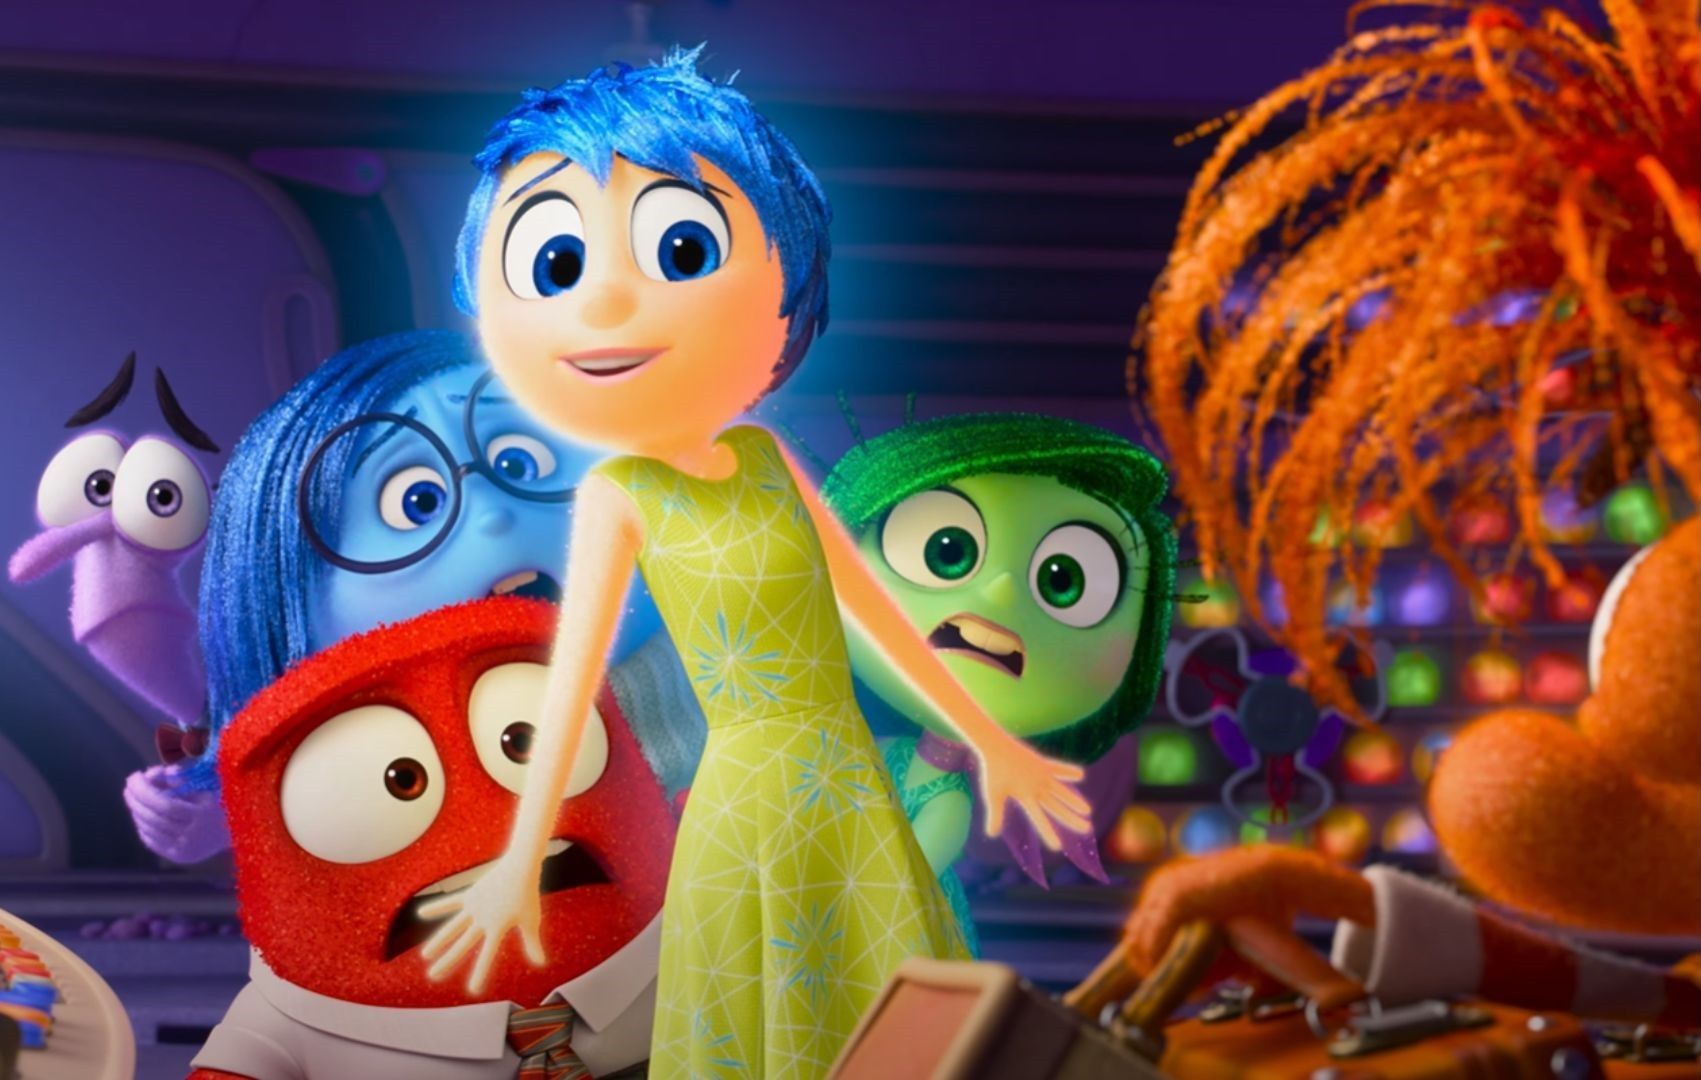 WATCH: Emotions run wild in 'Inside Out 2' official trailer